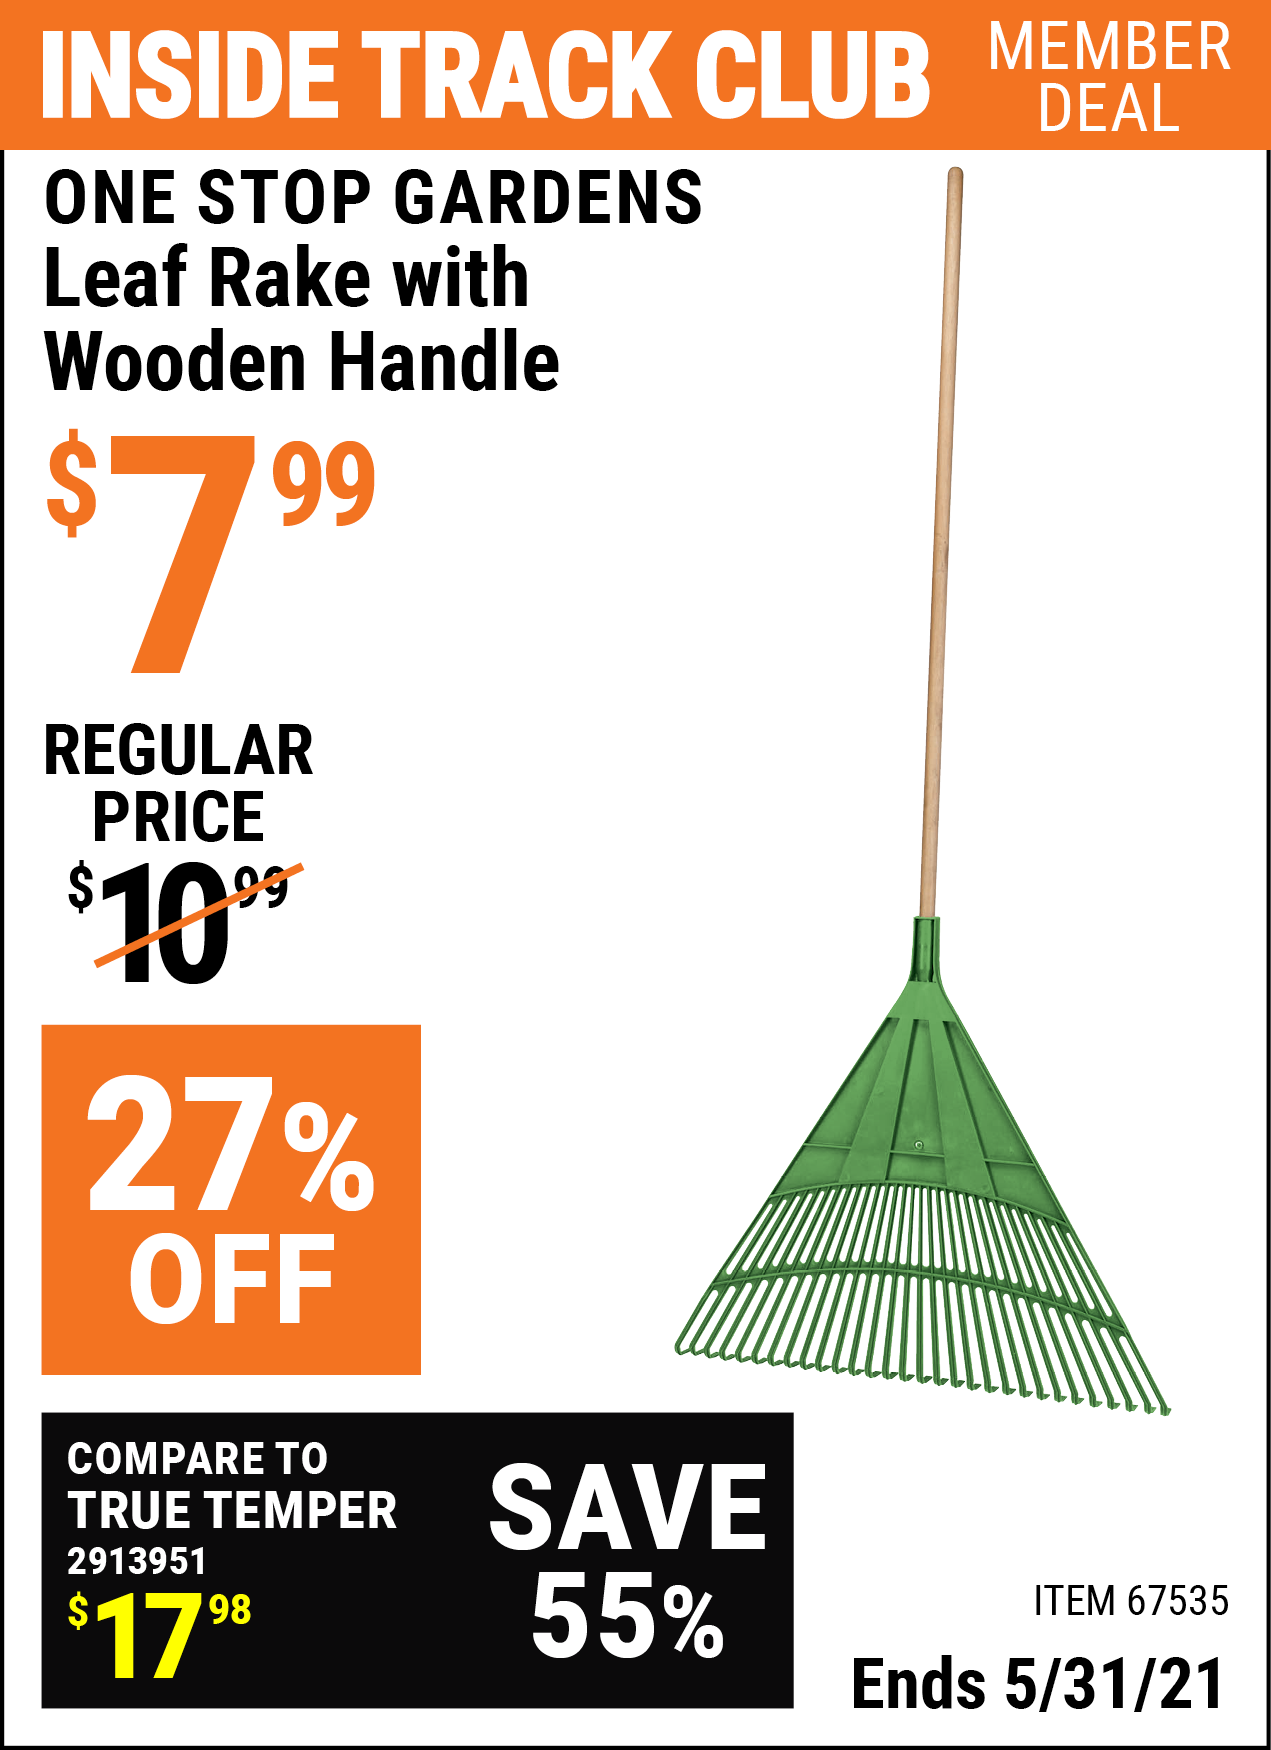 Inside Track Club members can buy the ONE STOP GARDENS Leaf Rake with Wood Handle (Item 67535) for $7.99, valid through 5/31/2021.